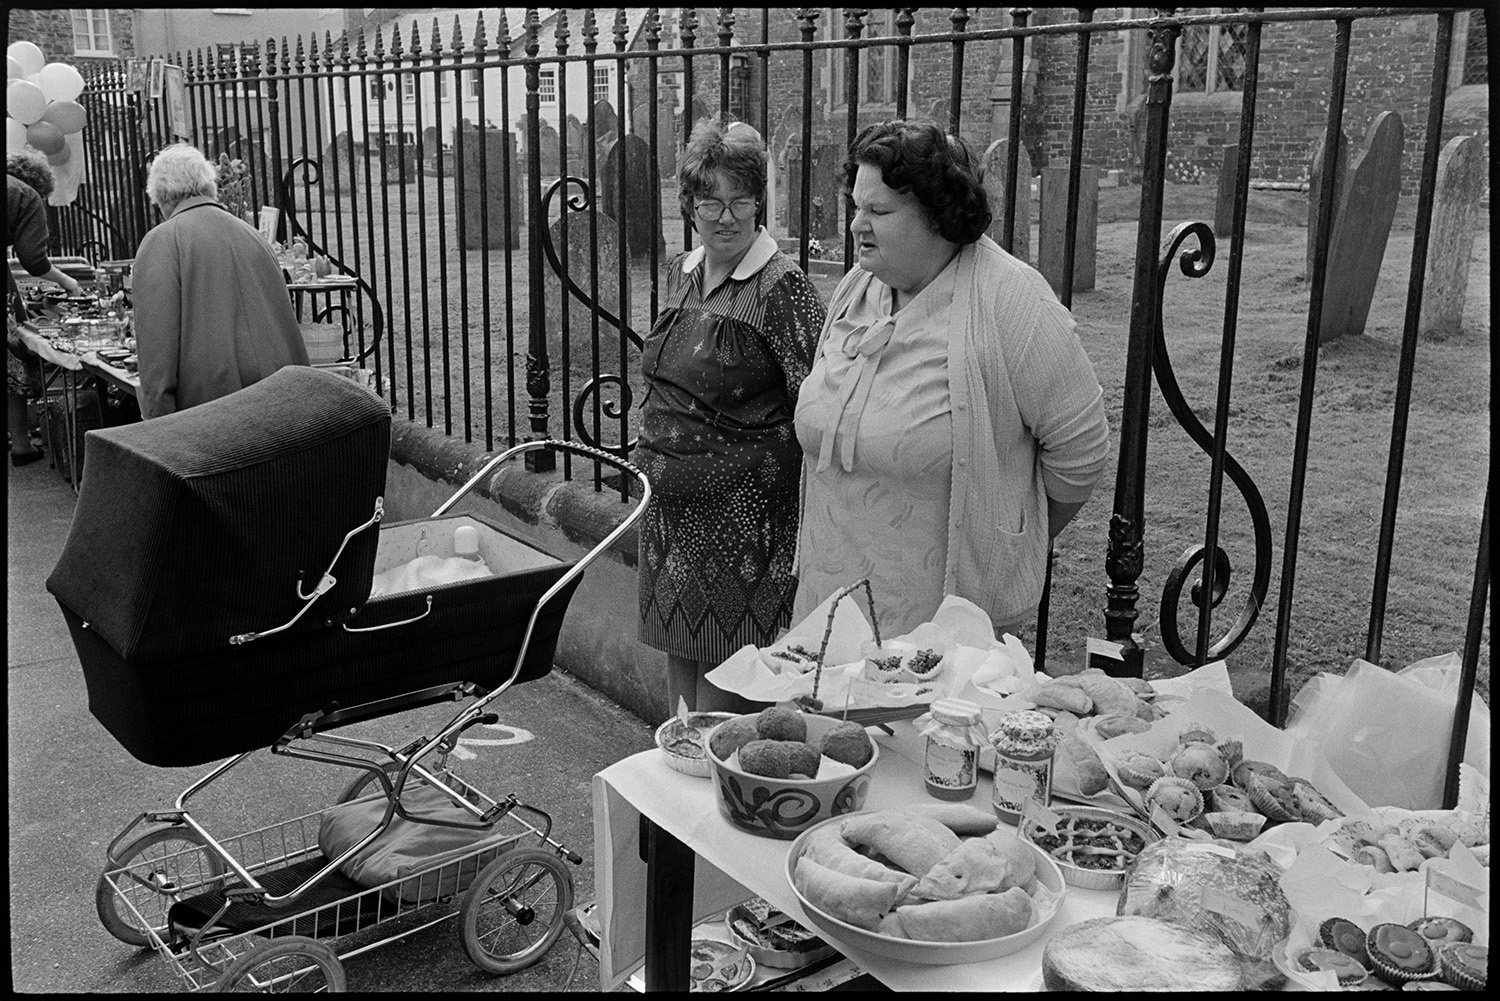 Procession, Queen and attendants from church to open fair, money scramble, cake stalls.
[Two women with a pram standing and talking next to a table spread with food by the church railings at Chulmleigh Fair. The churchyard can be seen in the background.]